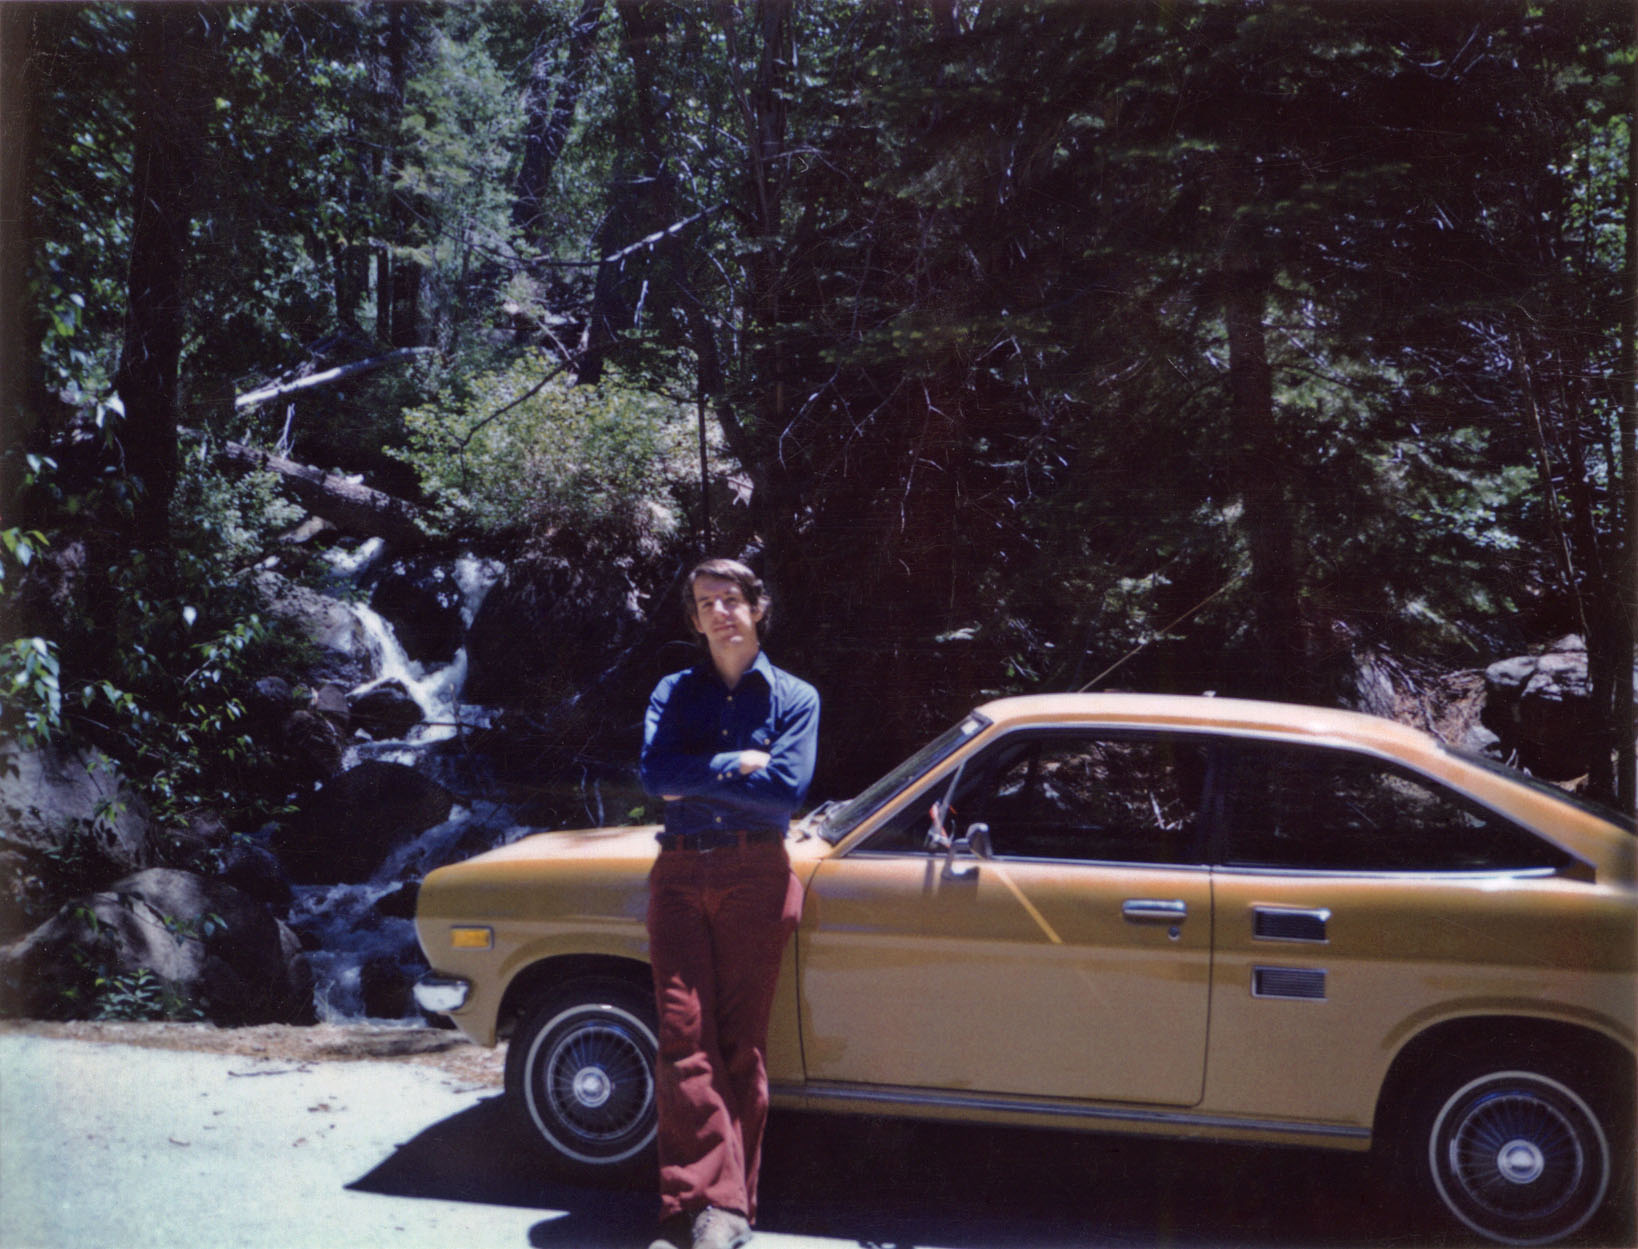 Summer 1972, Lake Tahoe. You'd think, after hearing me rhapsodize about my lifelong obsession with cars, that a) I'd have learned to drive before I was 26, and b) my first car would have been something a bit more spectacular than a 1972 Datsun 1200. That's Nissan to you. Well, I had nice pants, anyway. Not bad for a Polaroid, though scuffed as usual. View full size.